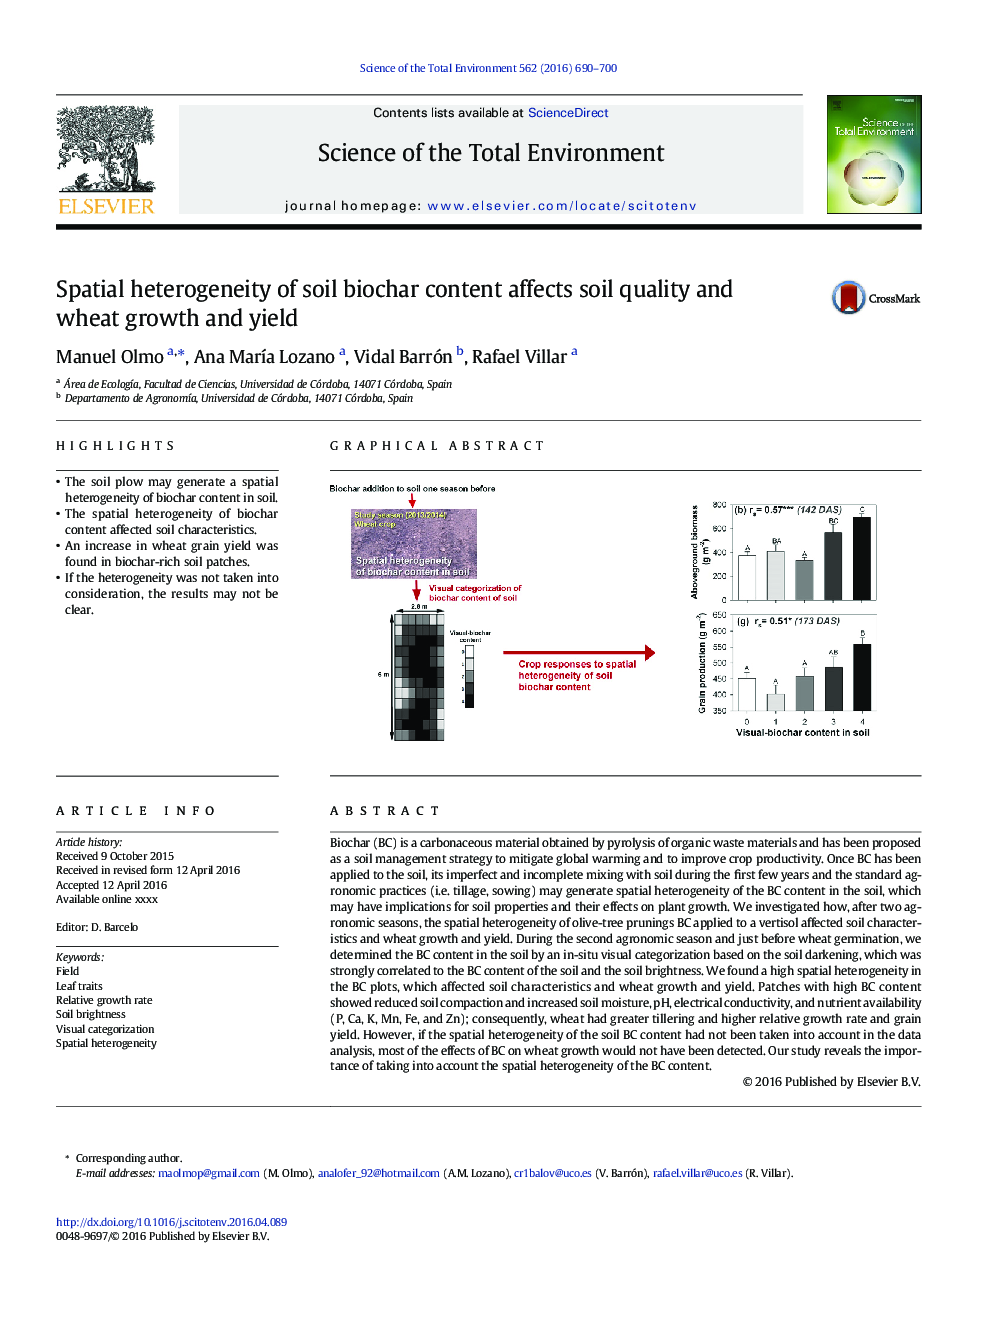 Spatial heterogeneity of soil biochar content affects soil quality and wheat growth and yield